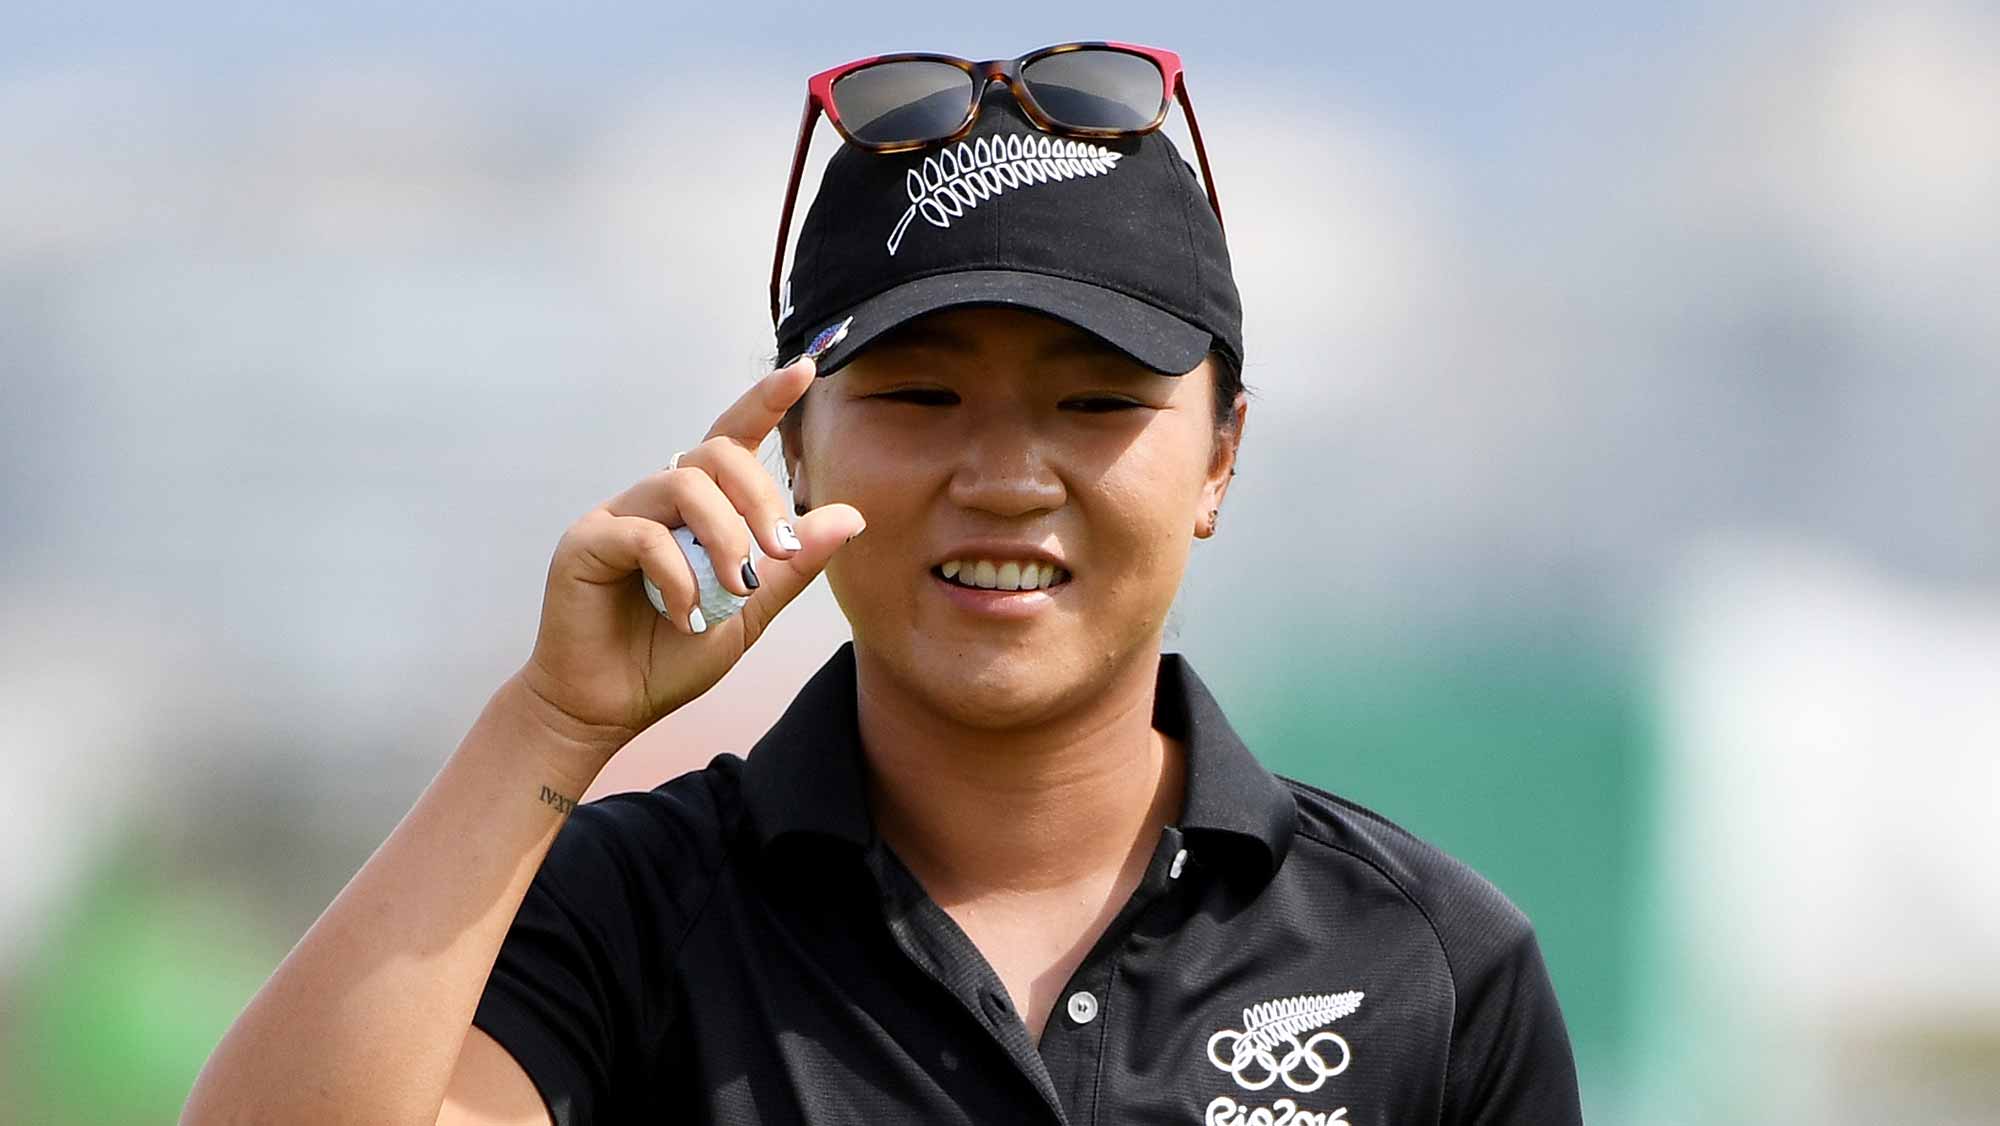 Lydia Ko of New Zealand reacts to her birdie on the seventh green during the Women's Golf Final on Day 15 of the Rio 2016 Olympic Games at the Olympic Golf Course